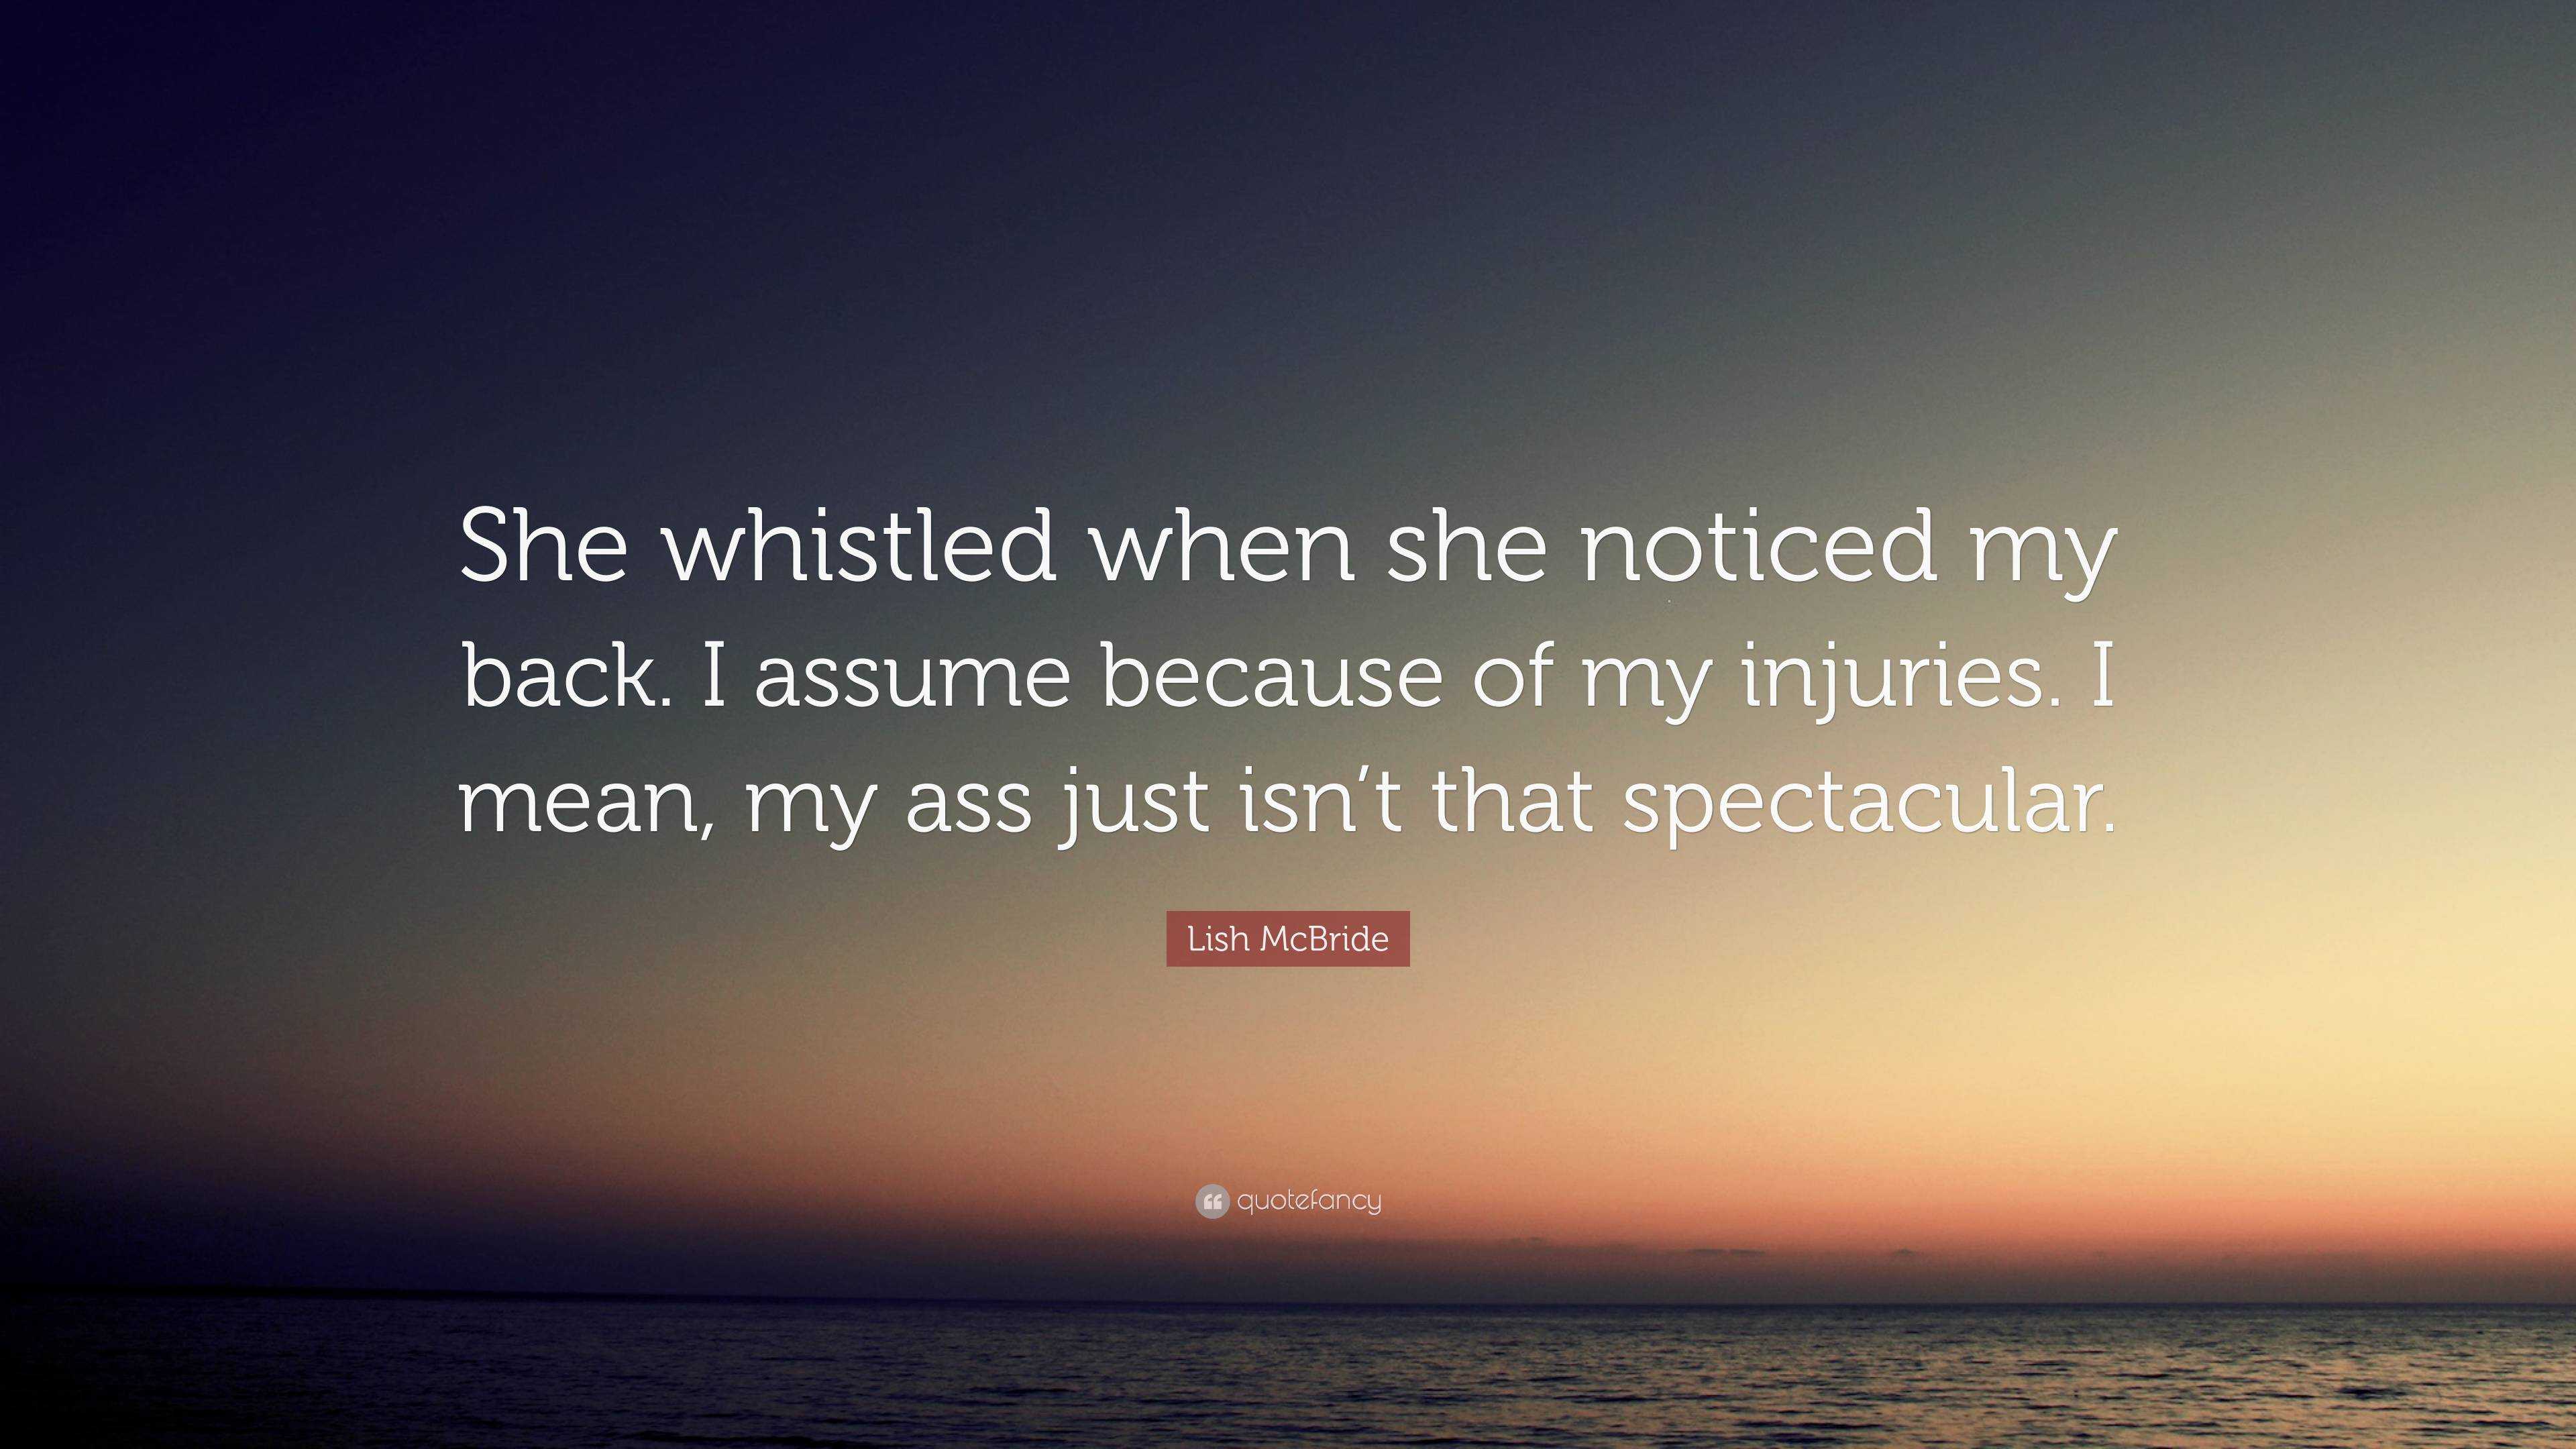 Lish McBride Quote: “She whistled when she noticed my back. I assume ...